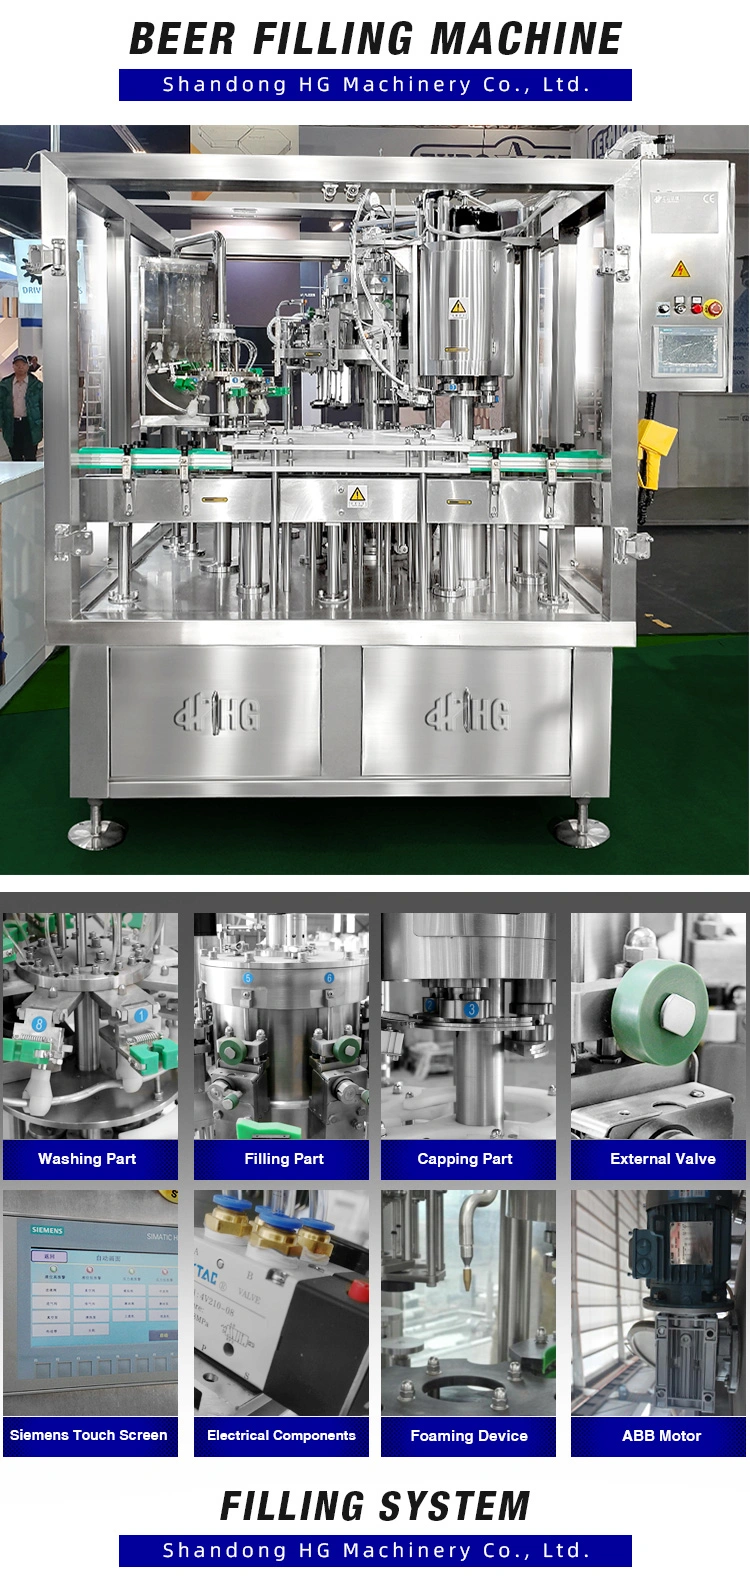 Eight Filling Heads Glass Bottle Filling and Capping Machine Automatic Craft Beer Filler